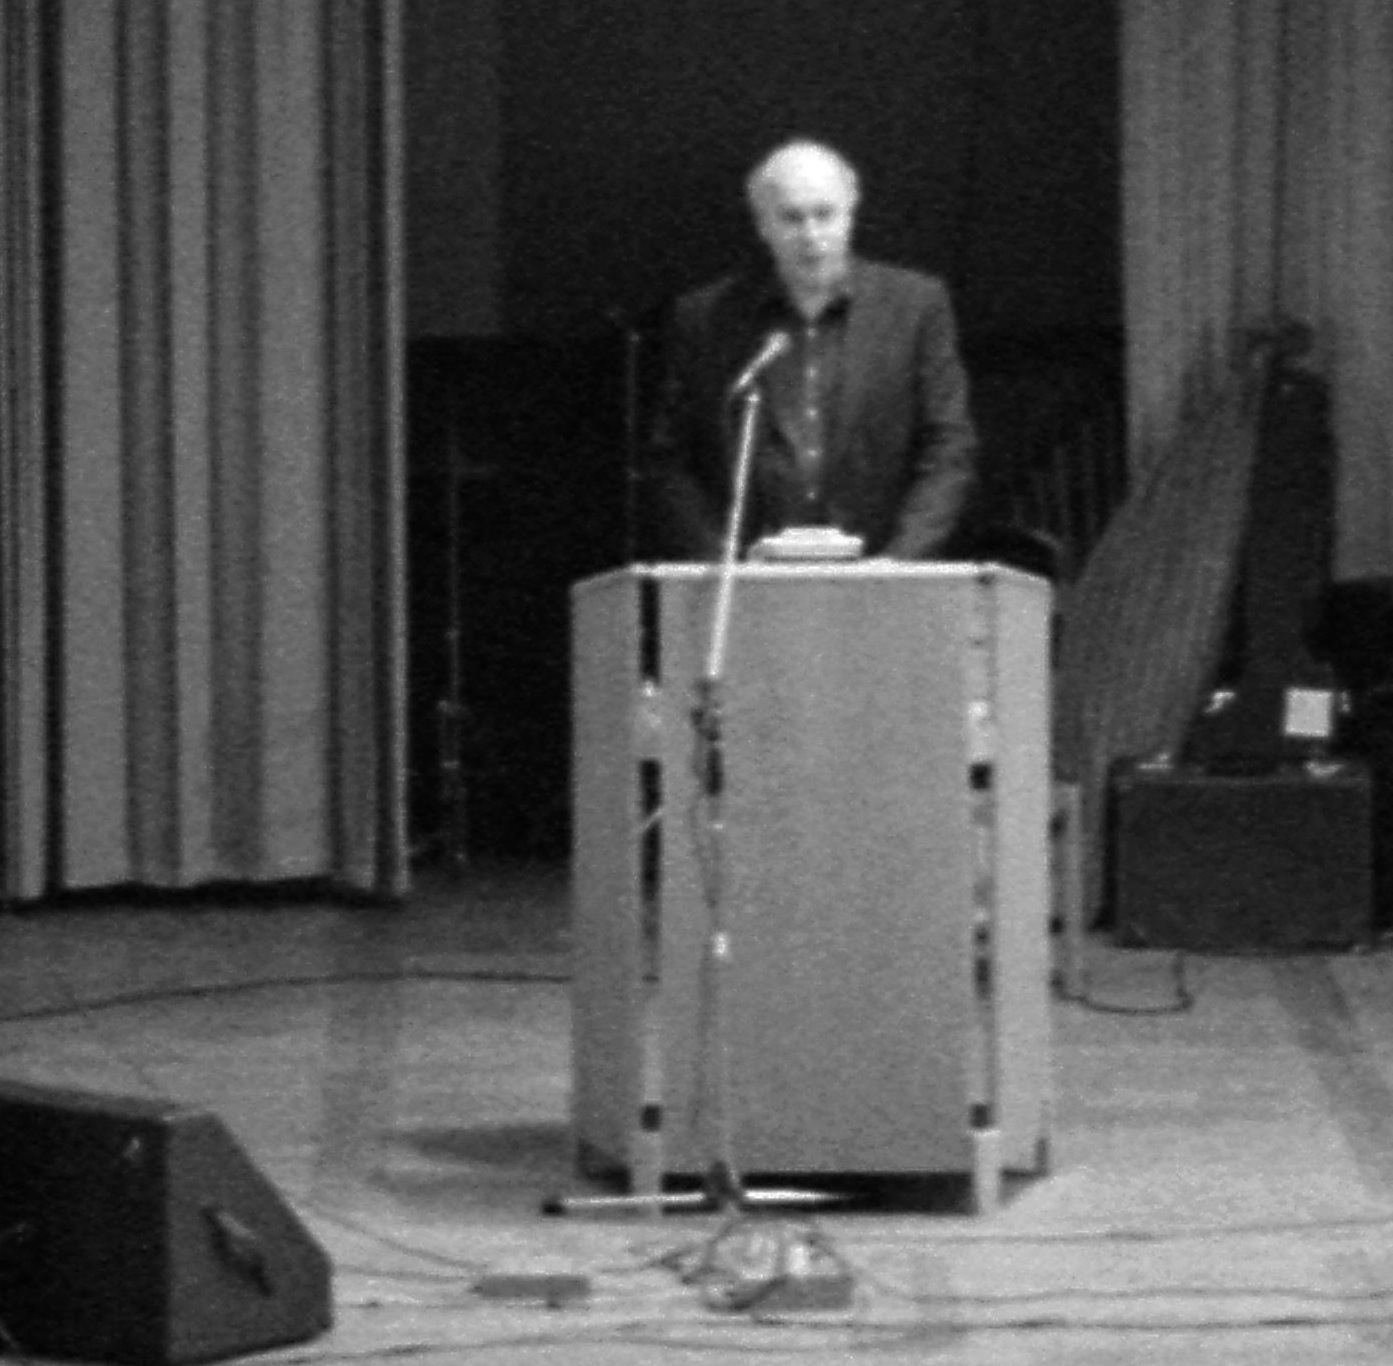 an old po of a man speaking at a podium